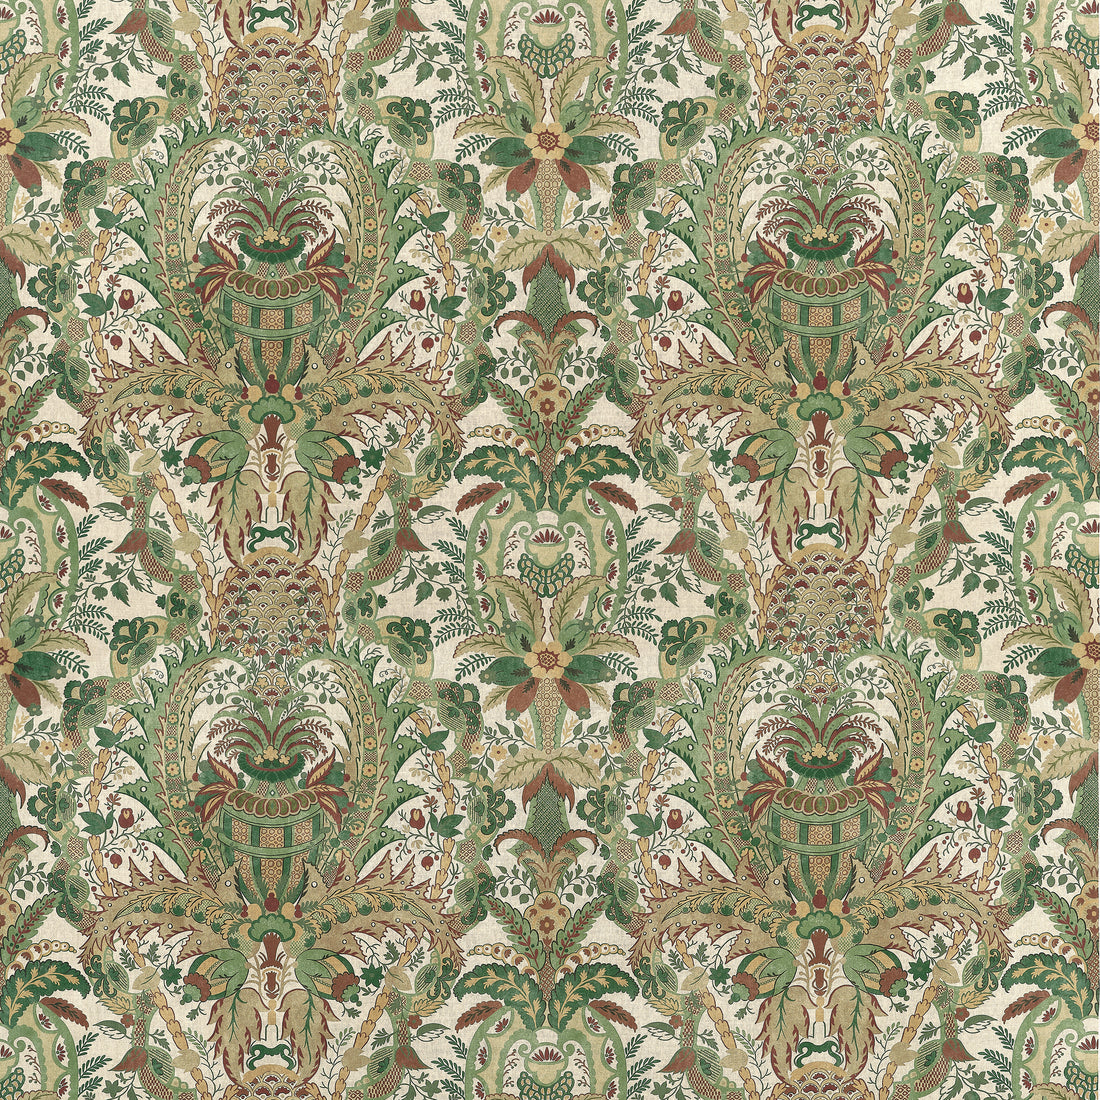 Narbeth fabric in natural and green color - pattern number AF57860 - by Anna French in the Bristol collection